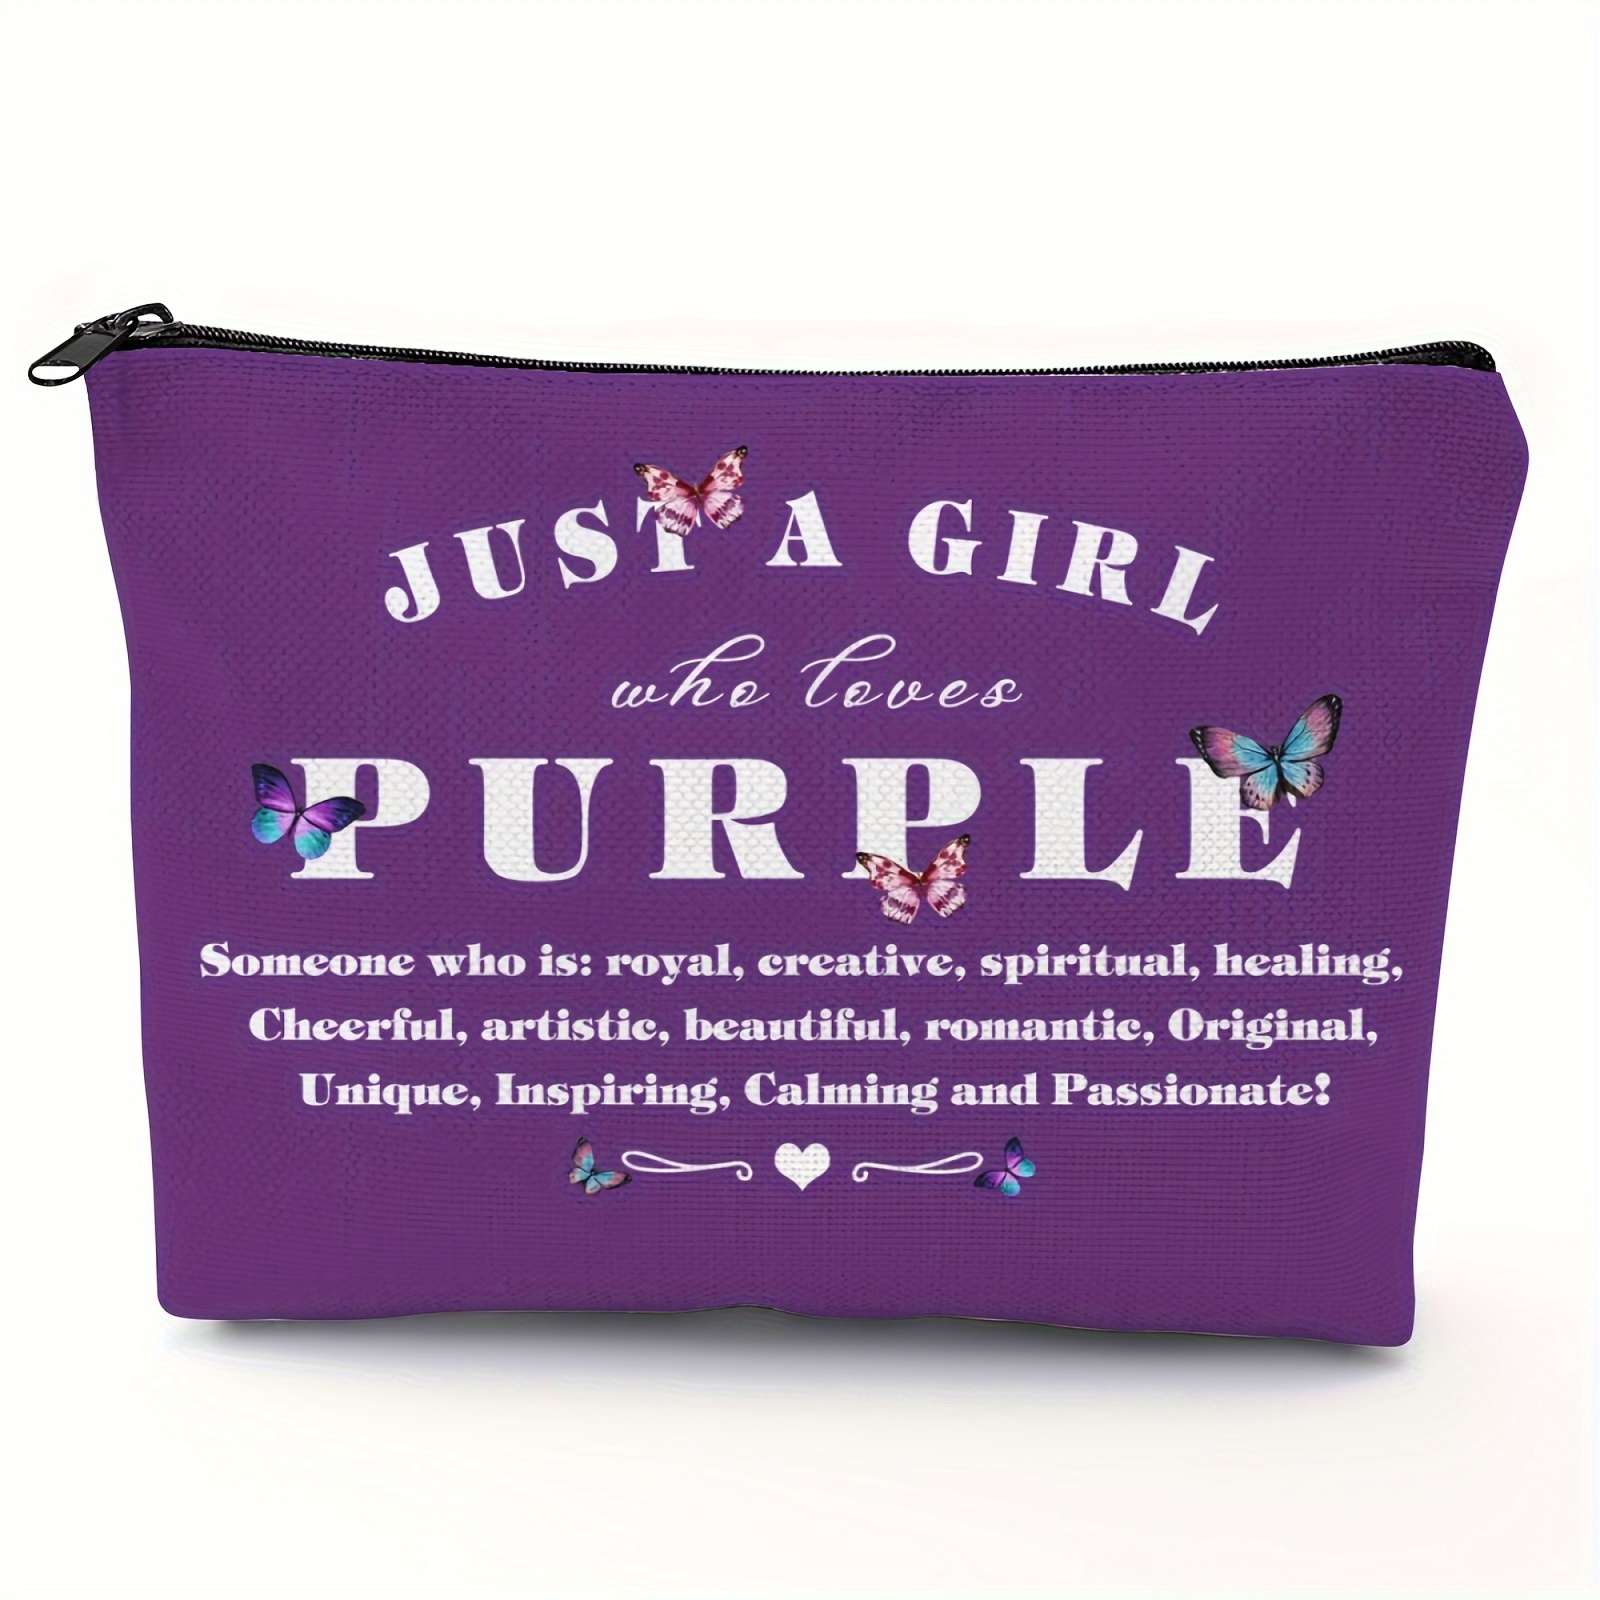 

Inspirational Purple Makeup Bag For Women With Butterfly Motif - Polyester, Non-waterproof, Unscented Cosmetic Pouch For Travel, Birthday & Graduation Gifts